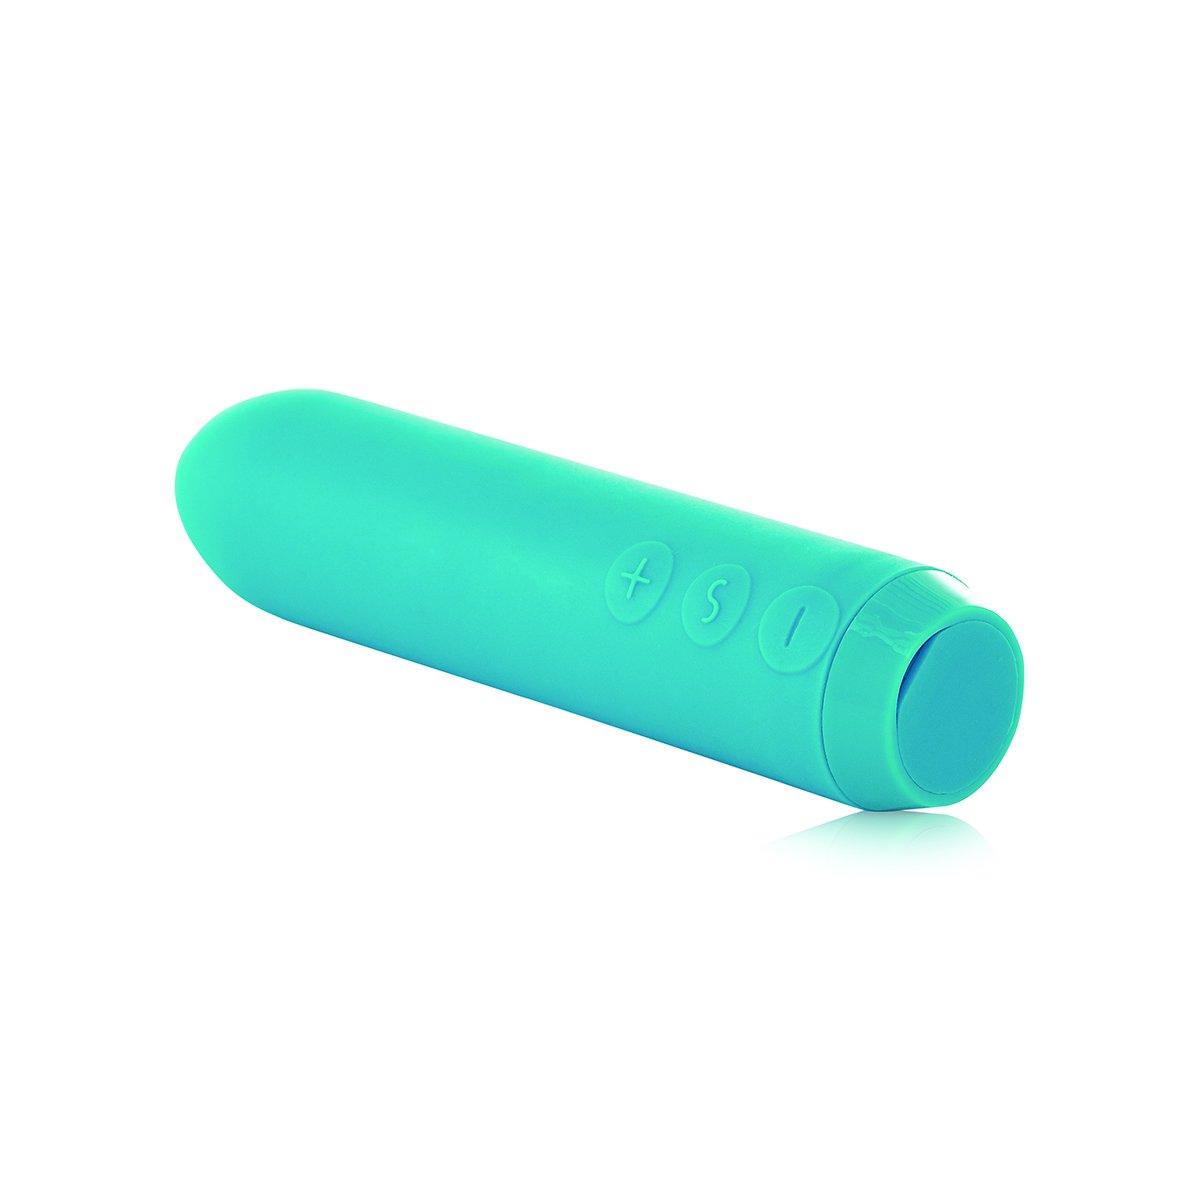 Turquoise Je Joue Bullet Classic - Teal